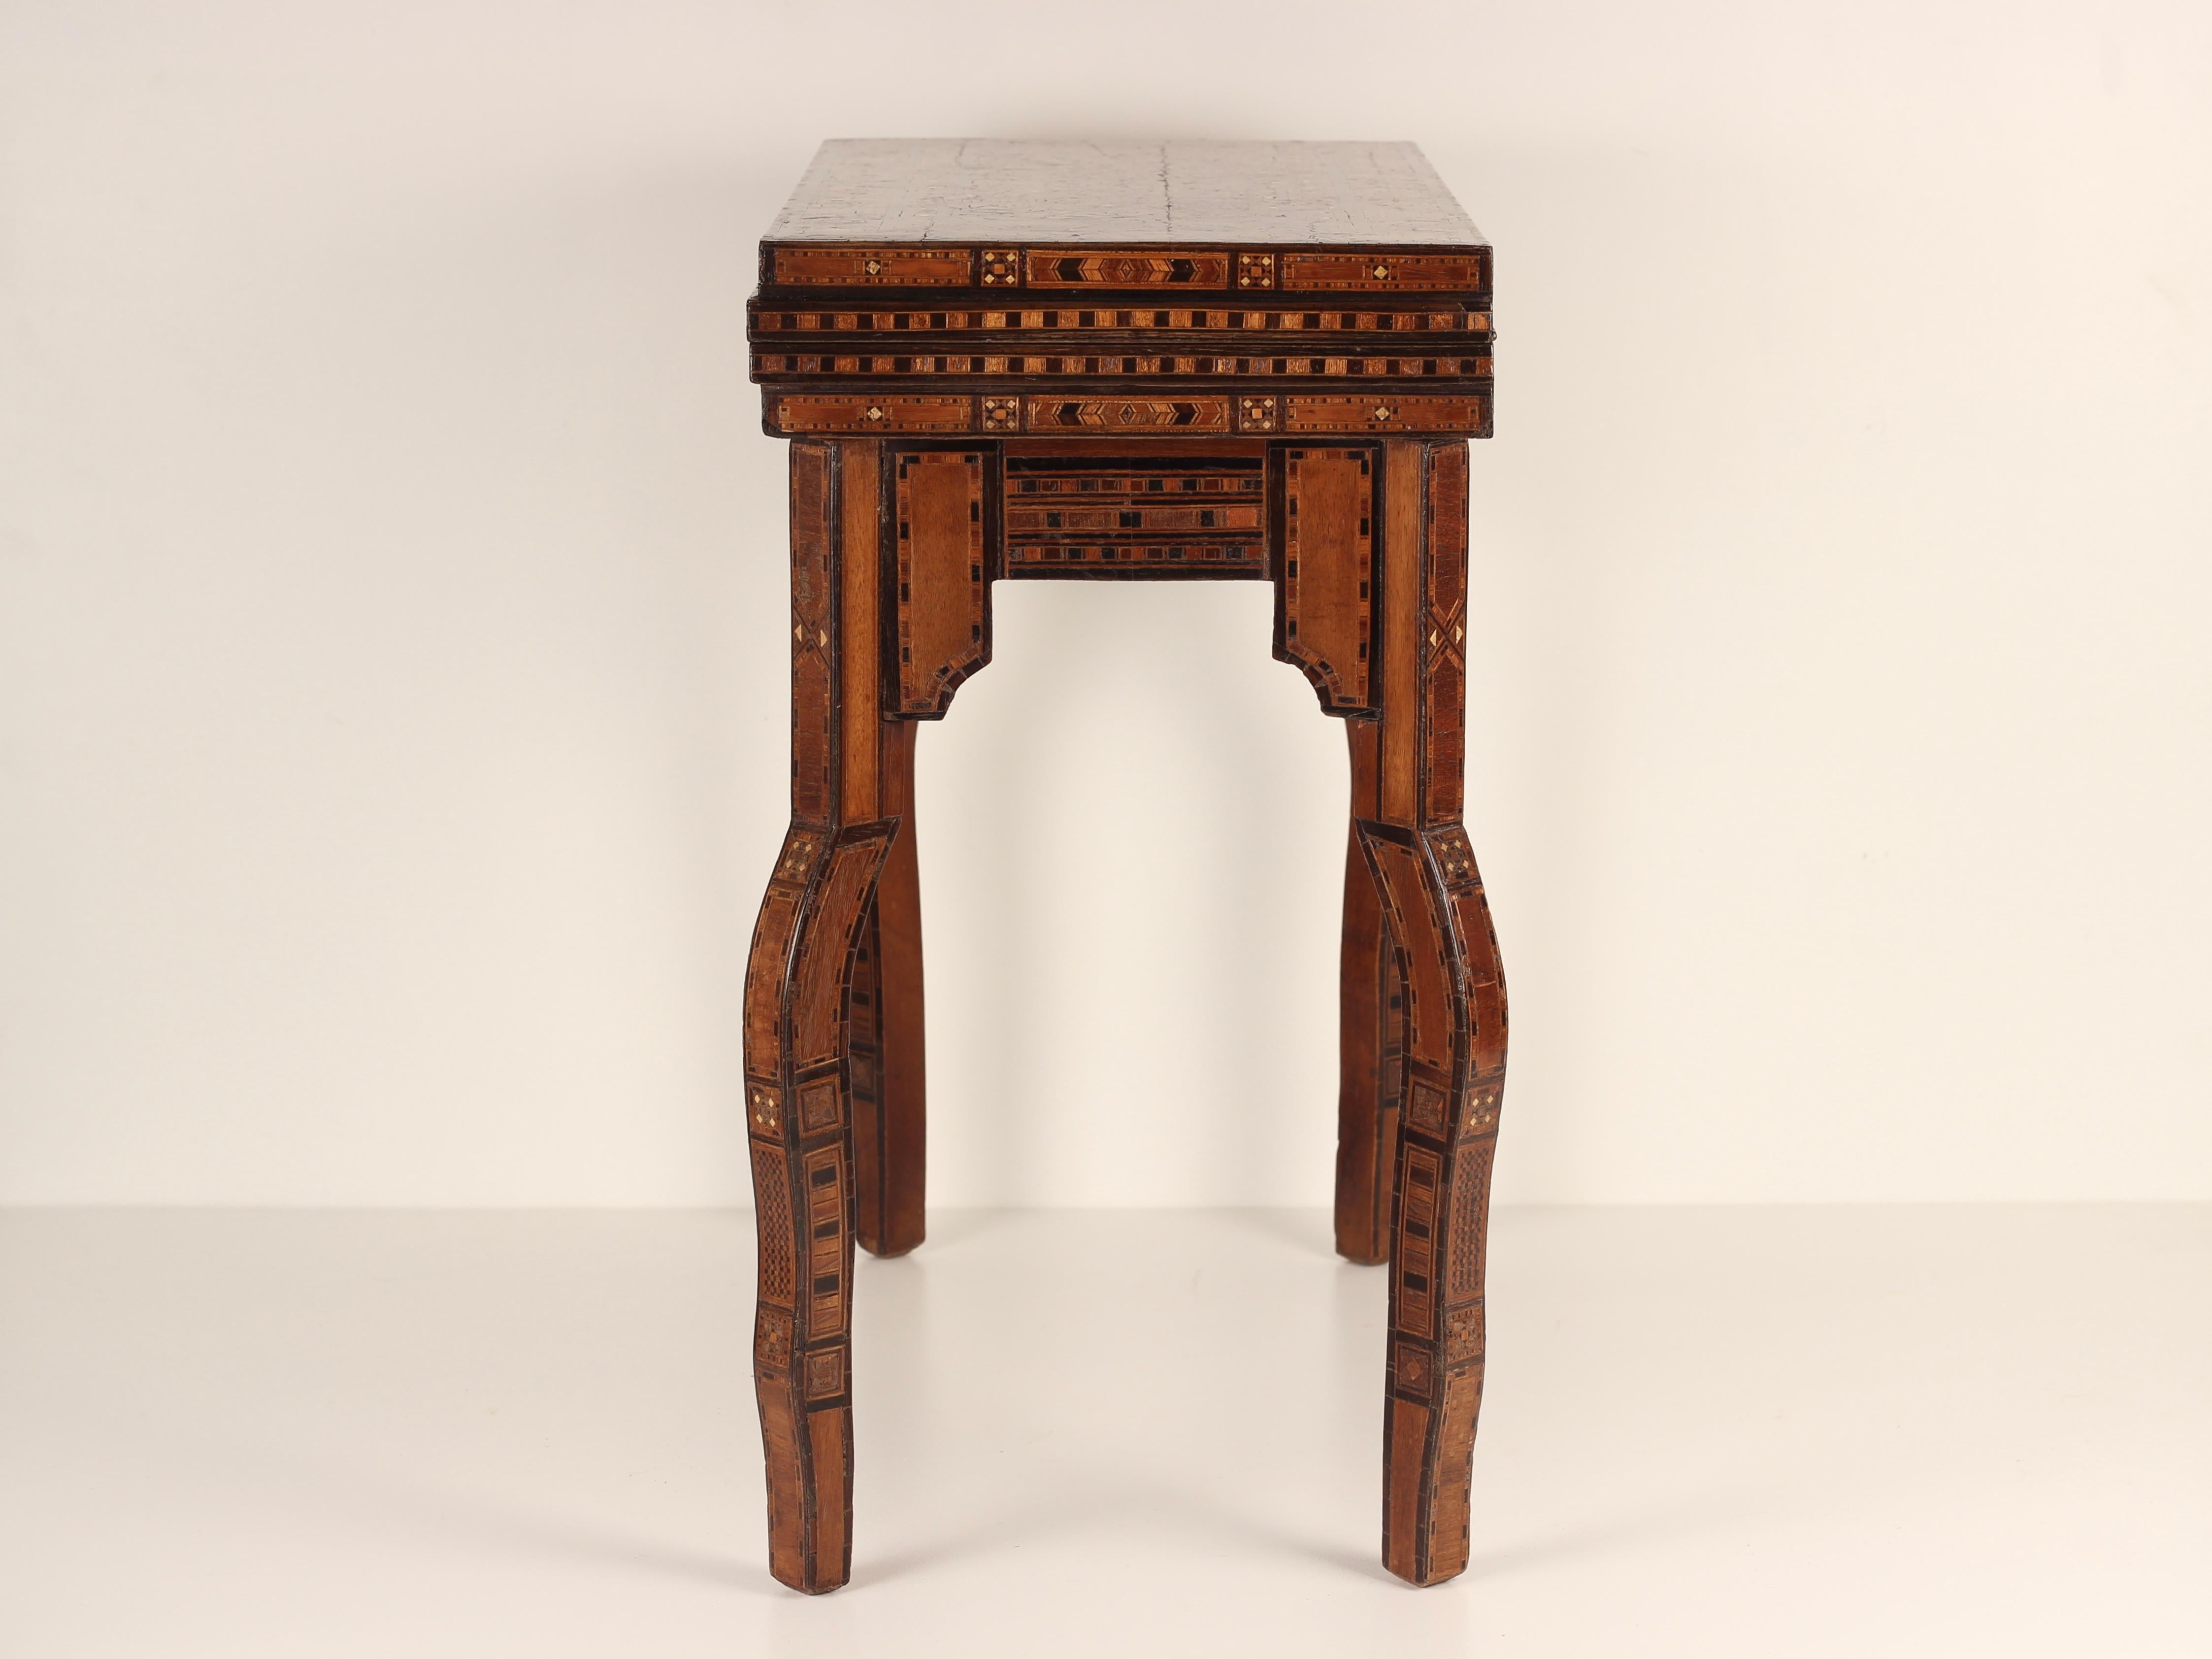 Early 20th Century Boho Chic Style Syrian 20th Century Artesian Inlaid Veneer Games Table For Sale